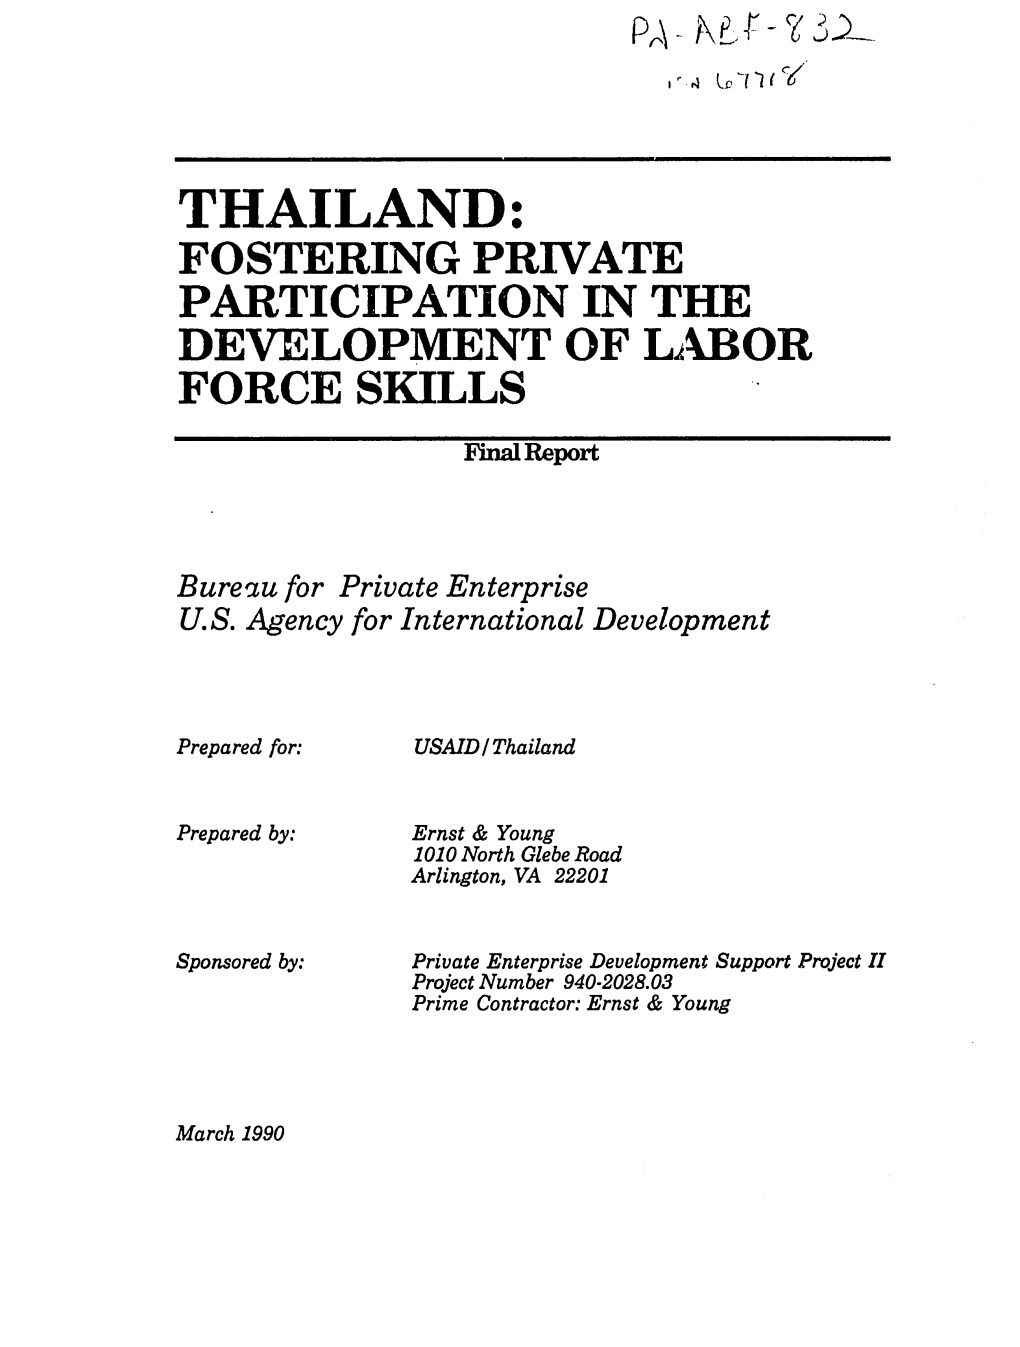 Thailand: Fostering Private Participation in the Development of Labor Force Skills